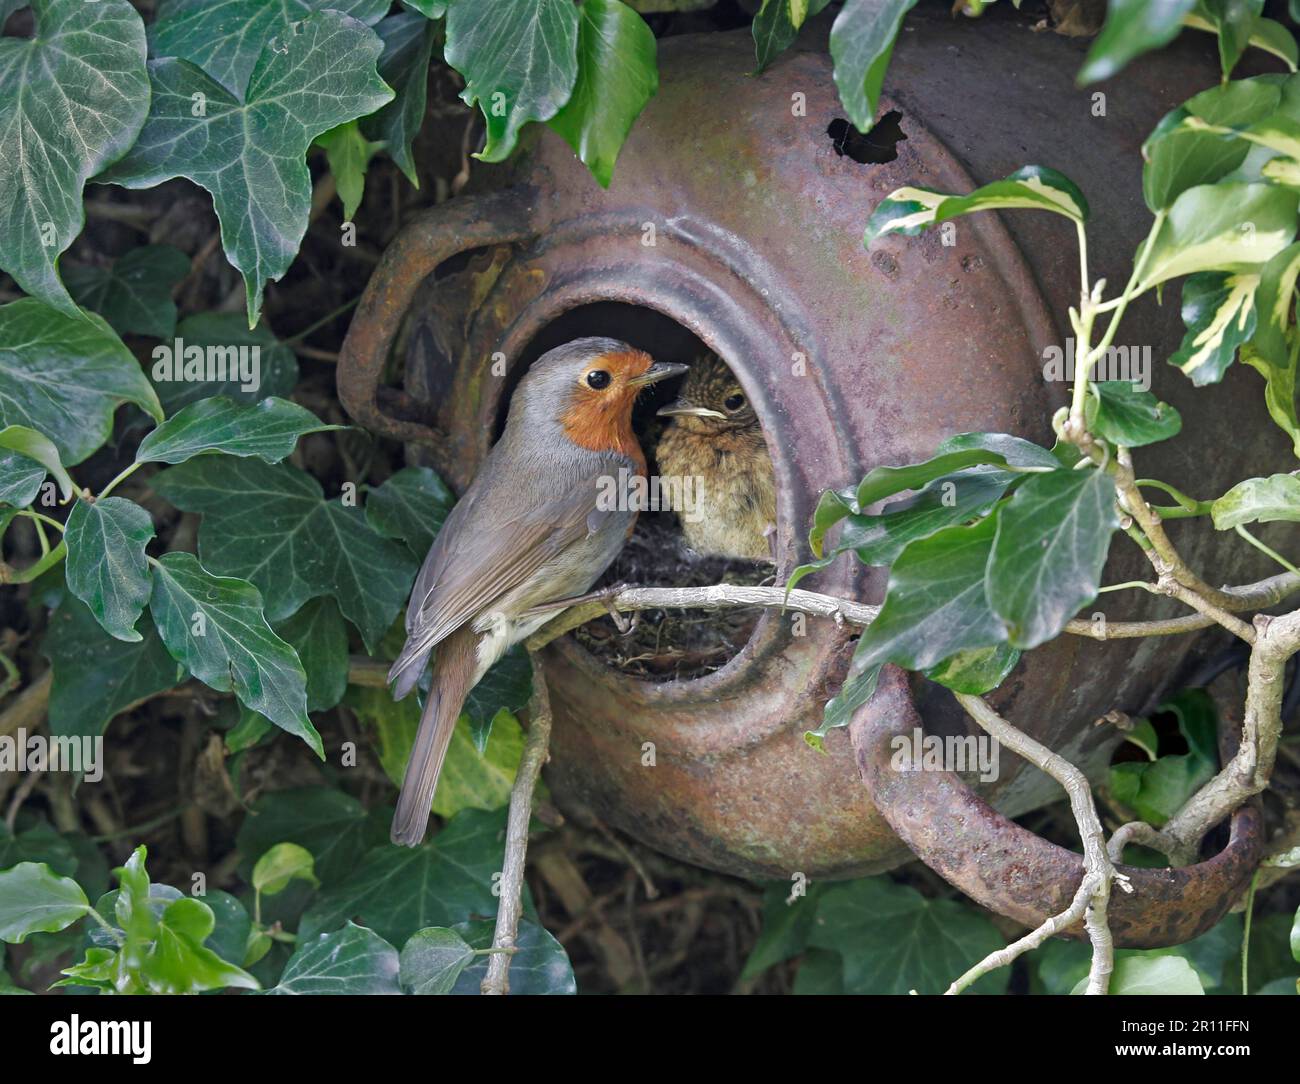 European Robin (Erithacus rubecula) adult with chick, at nest in old kettle, on ivy covered garden wall, Staffordshire, England, United Kingdom Stock Photo